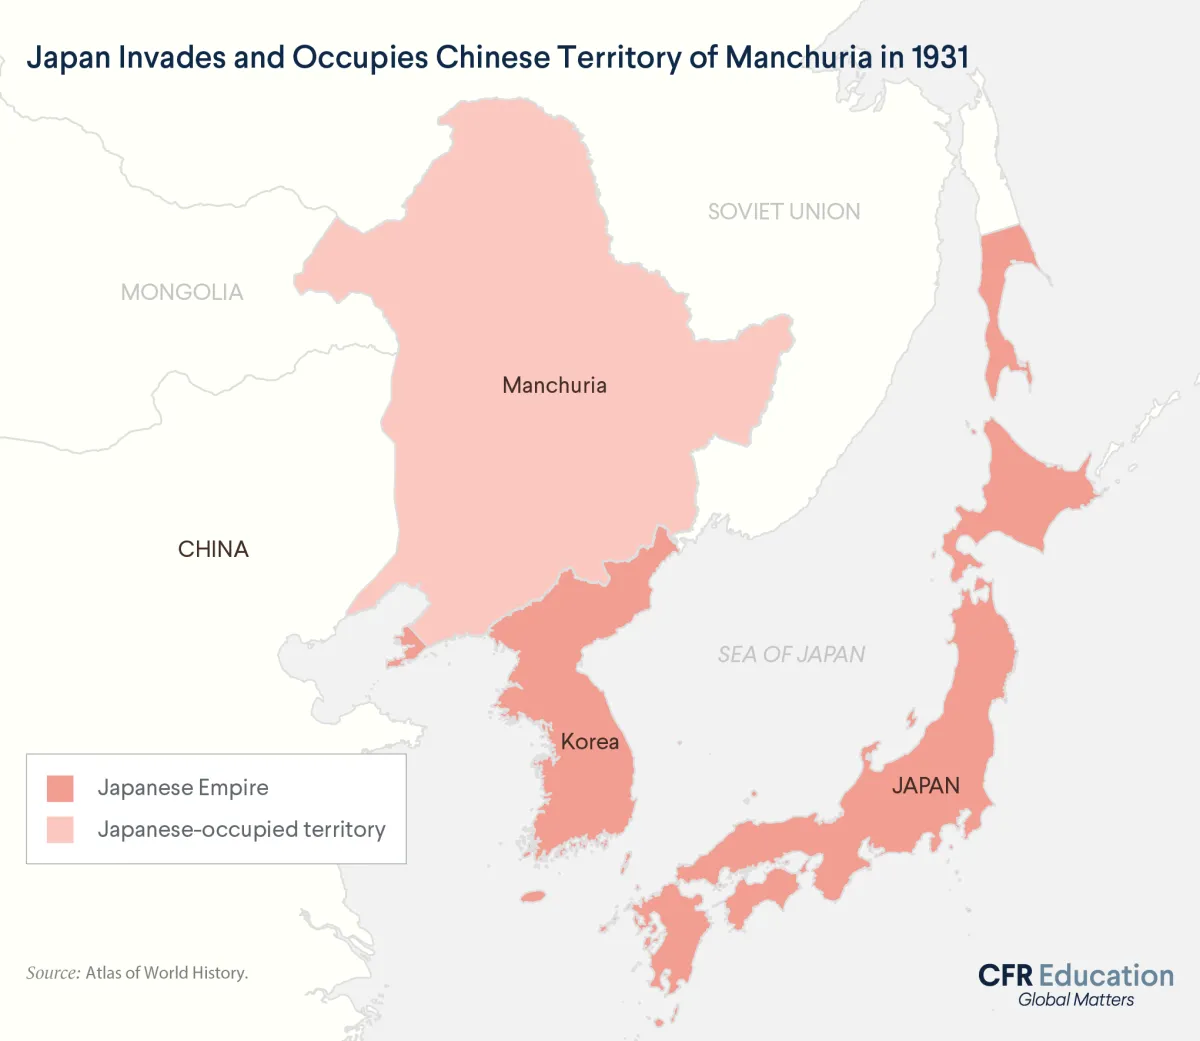 Map of the Japanese Empire and the Chinese territory Manchuria it occupied in 1931. For more info contact us at cfr_education@cfr.org.